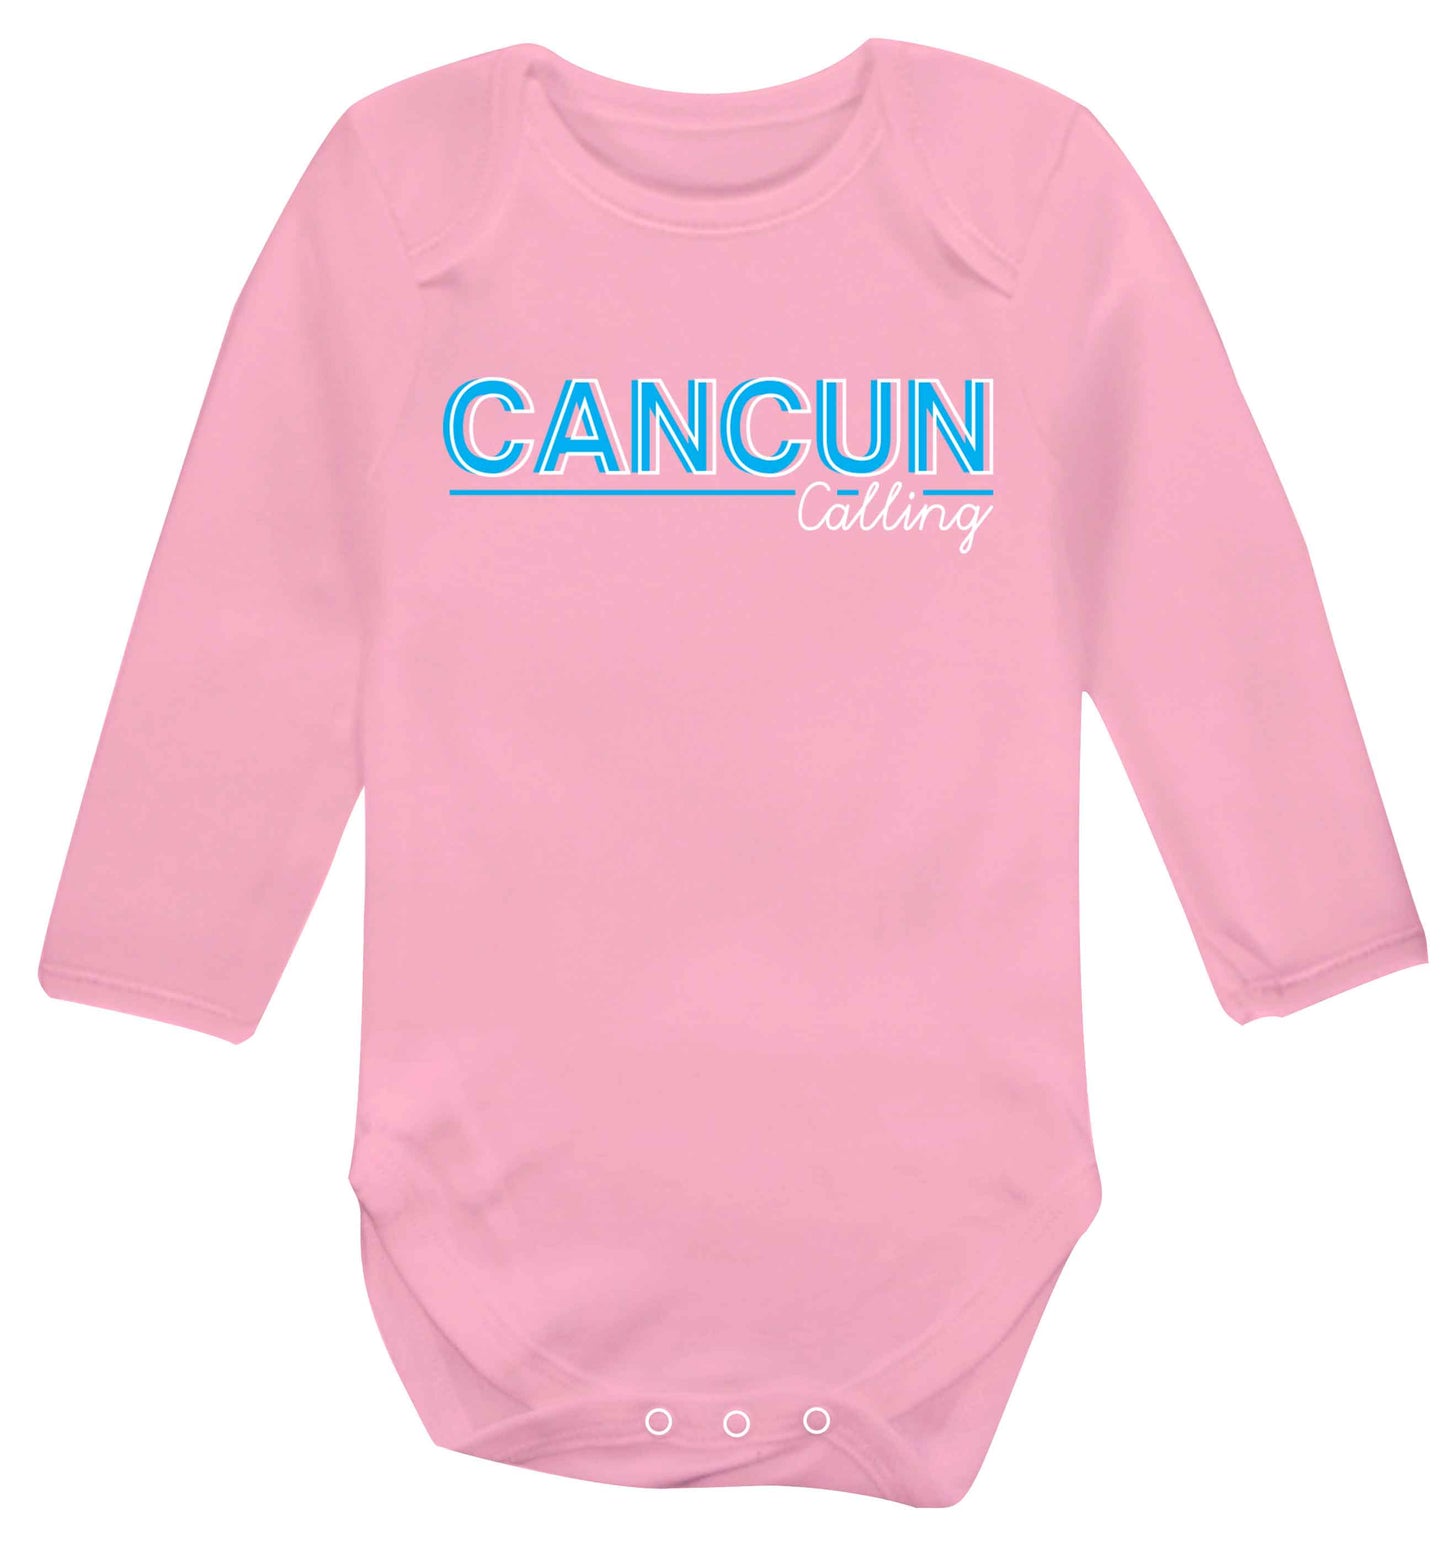 Cancun calling Baby Vest long sleeved pale pink 6-12 months